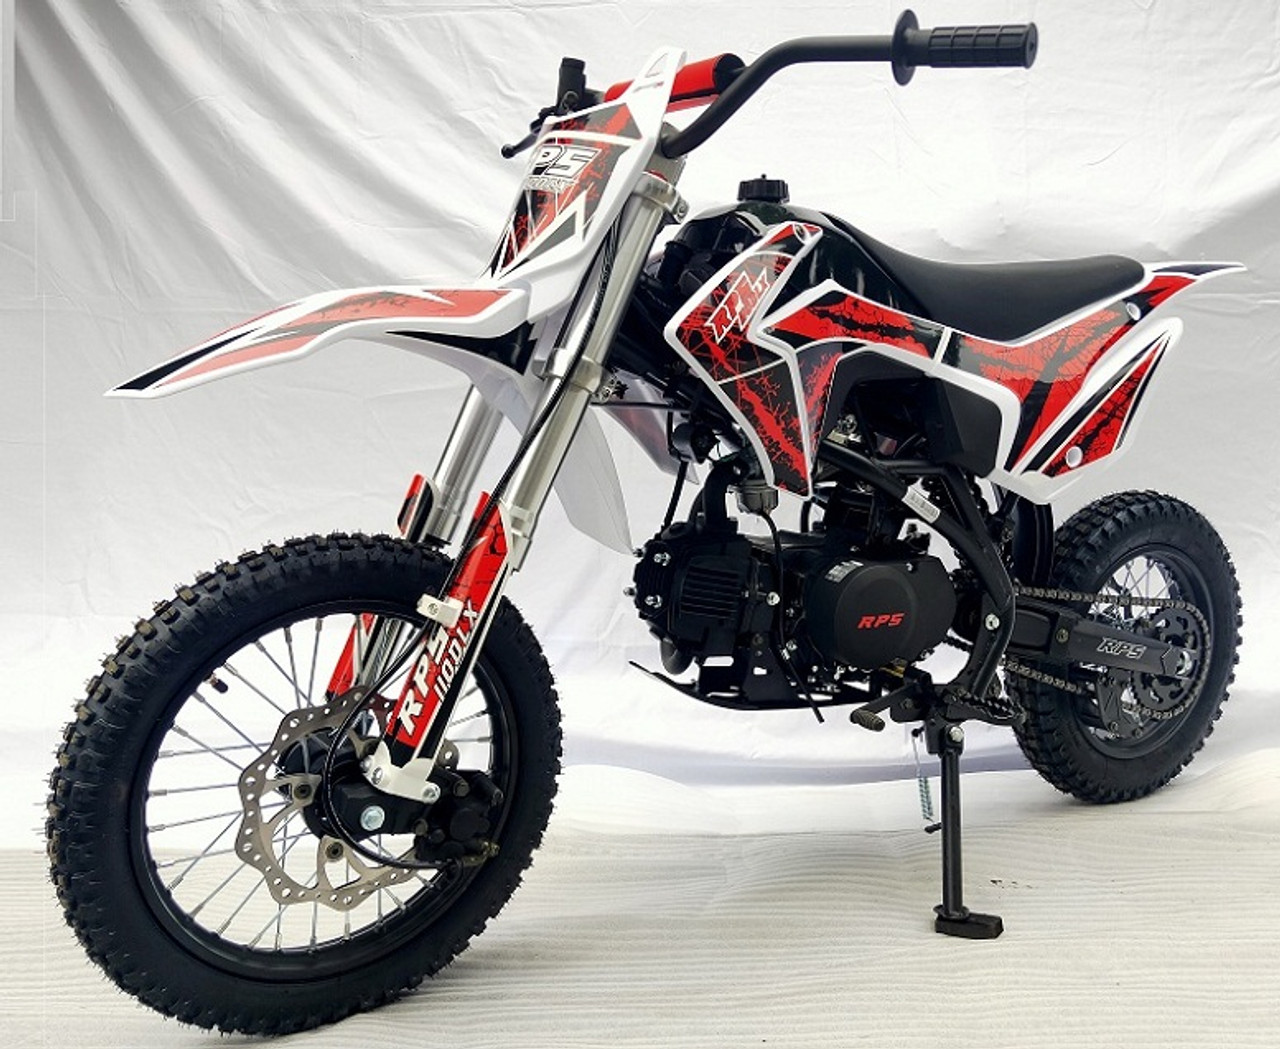 Buy NEW RPS 110 DLX DIRT BIKE for Sale online at